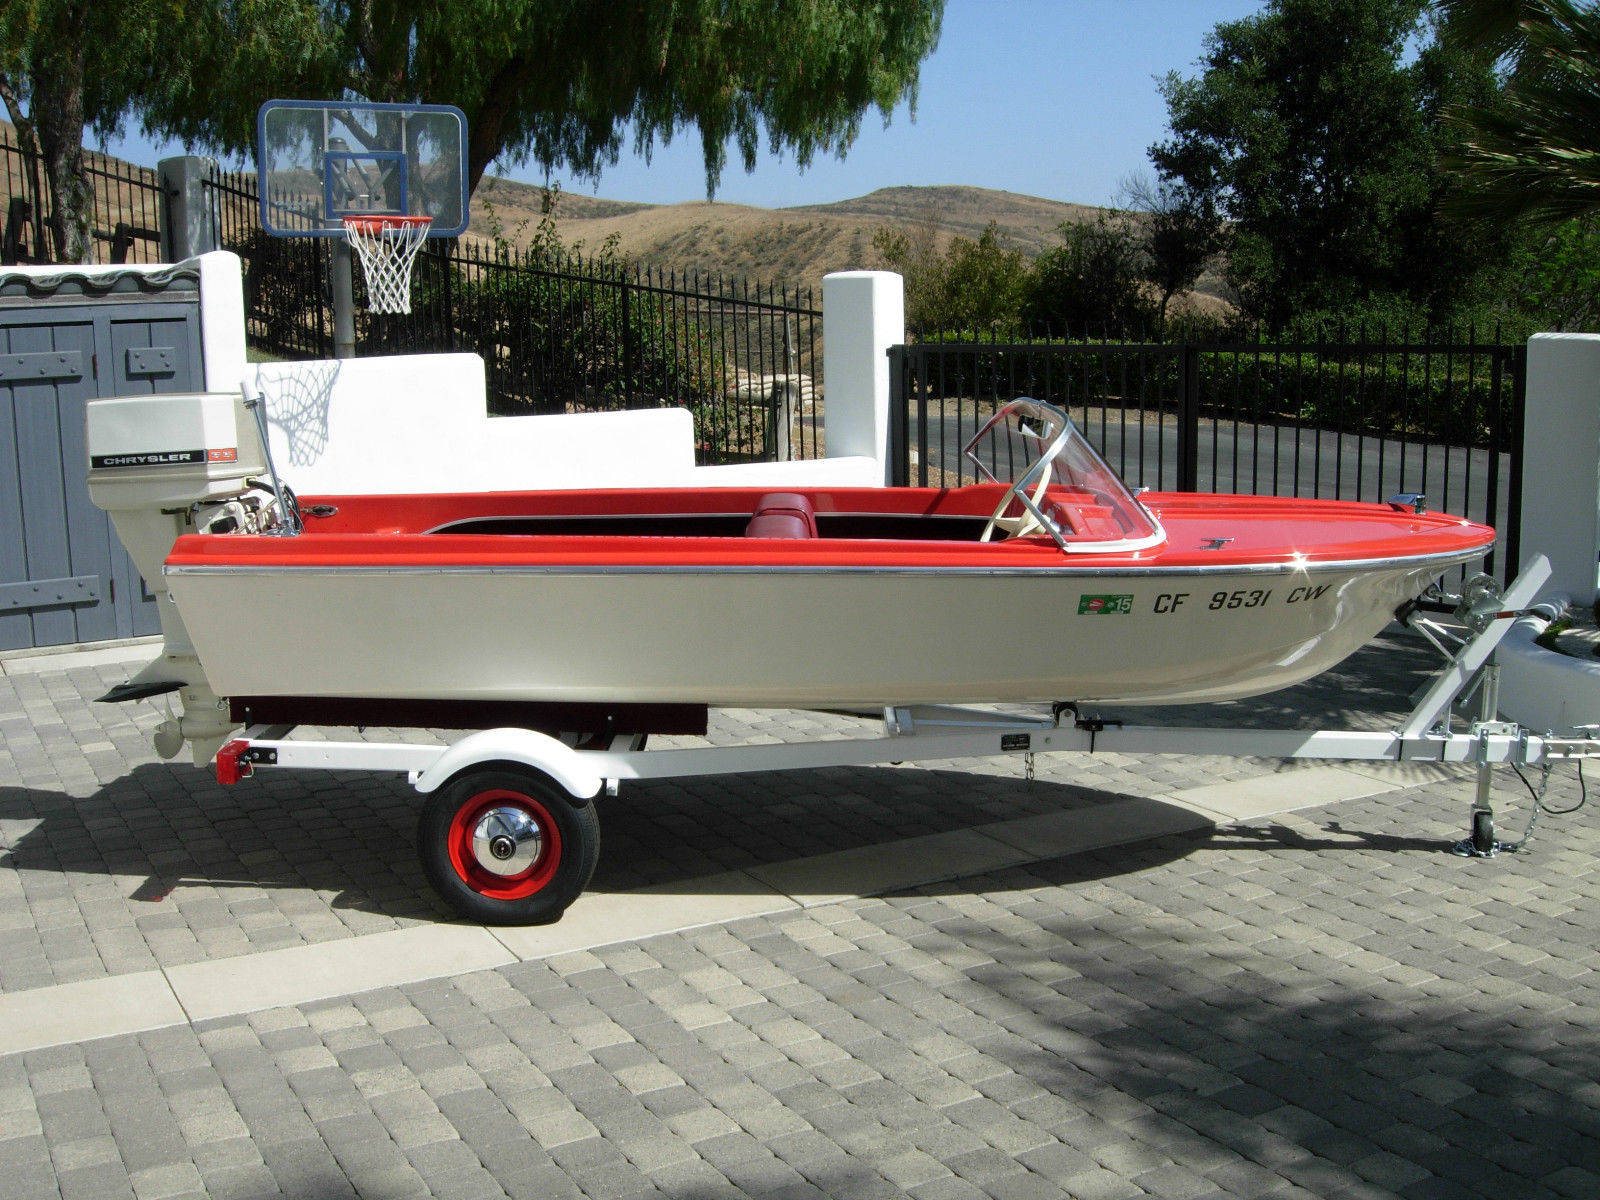 a rare classic 14' Sears runabout boat, The boat is truly a unrestored...